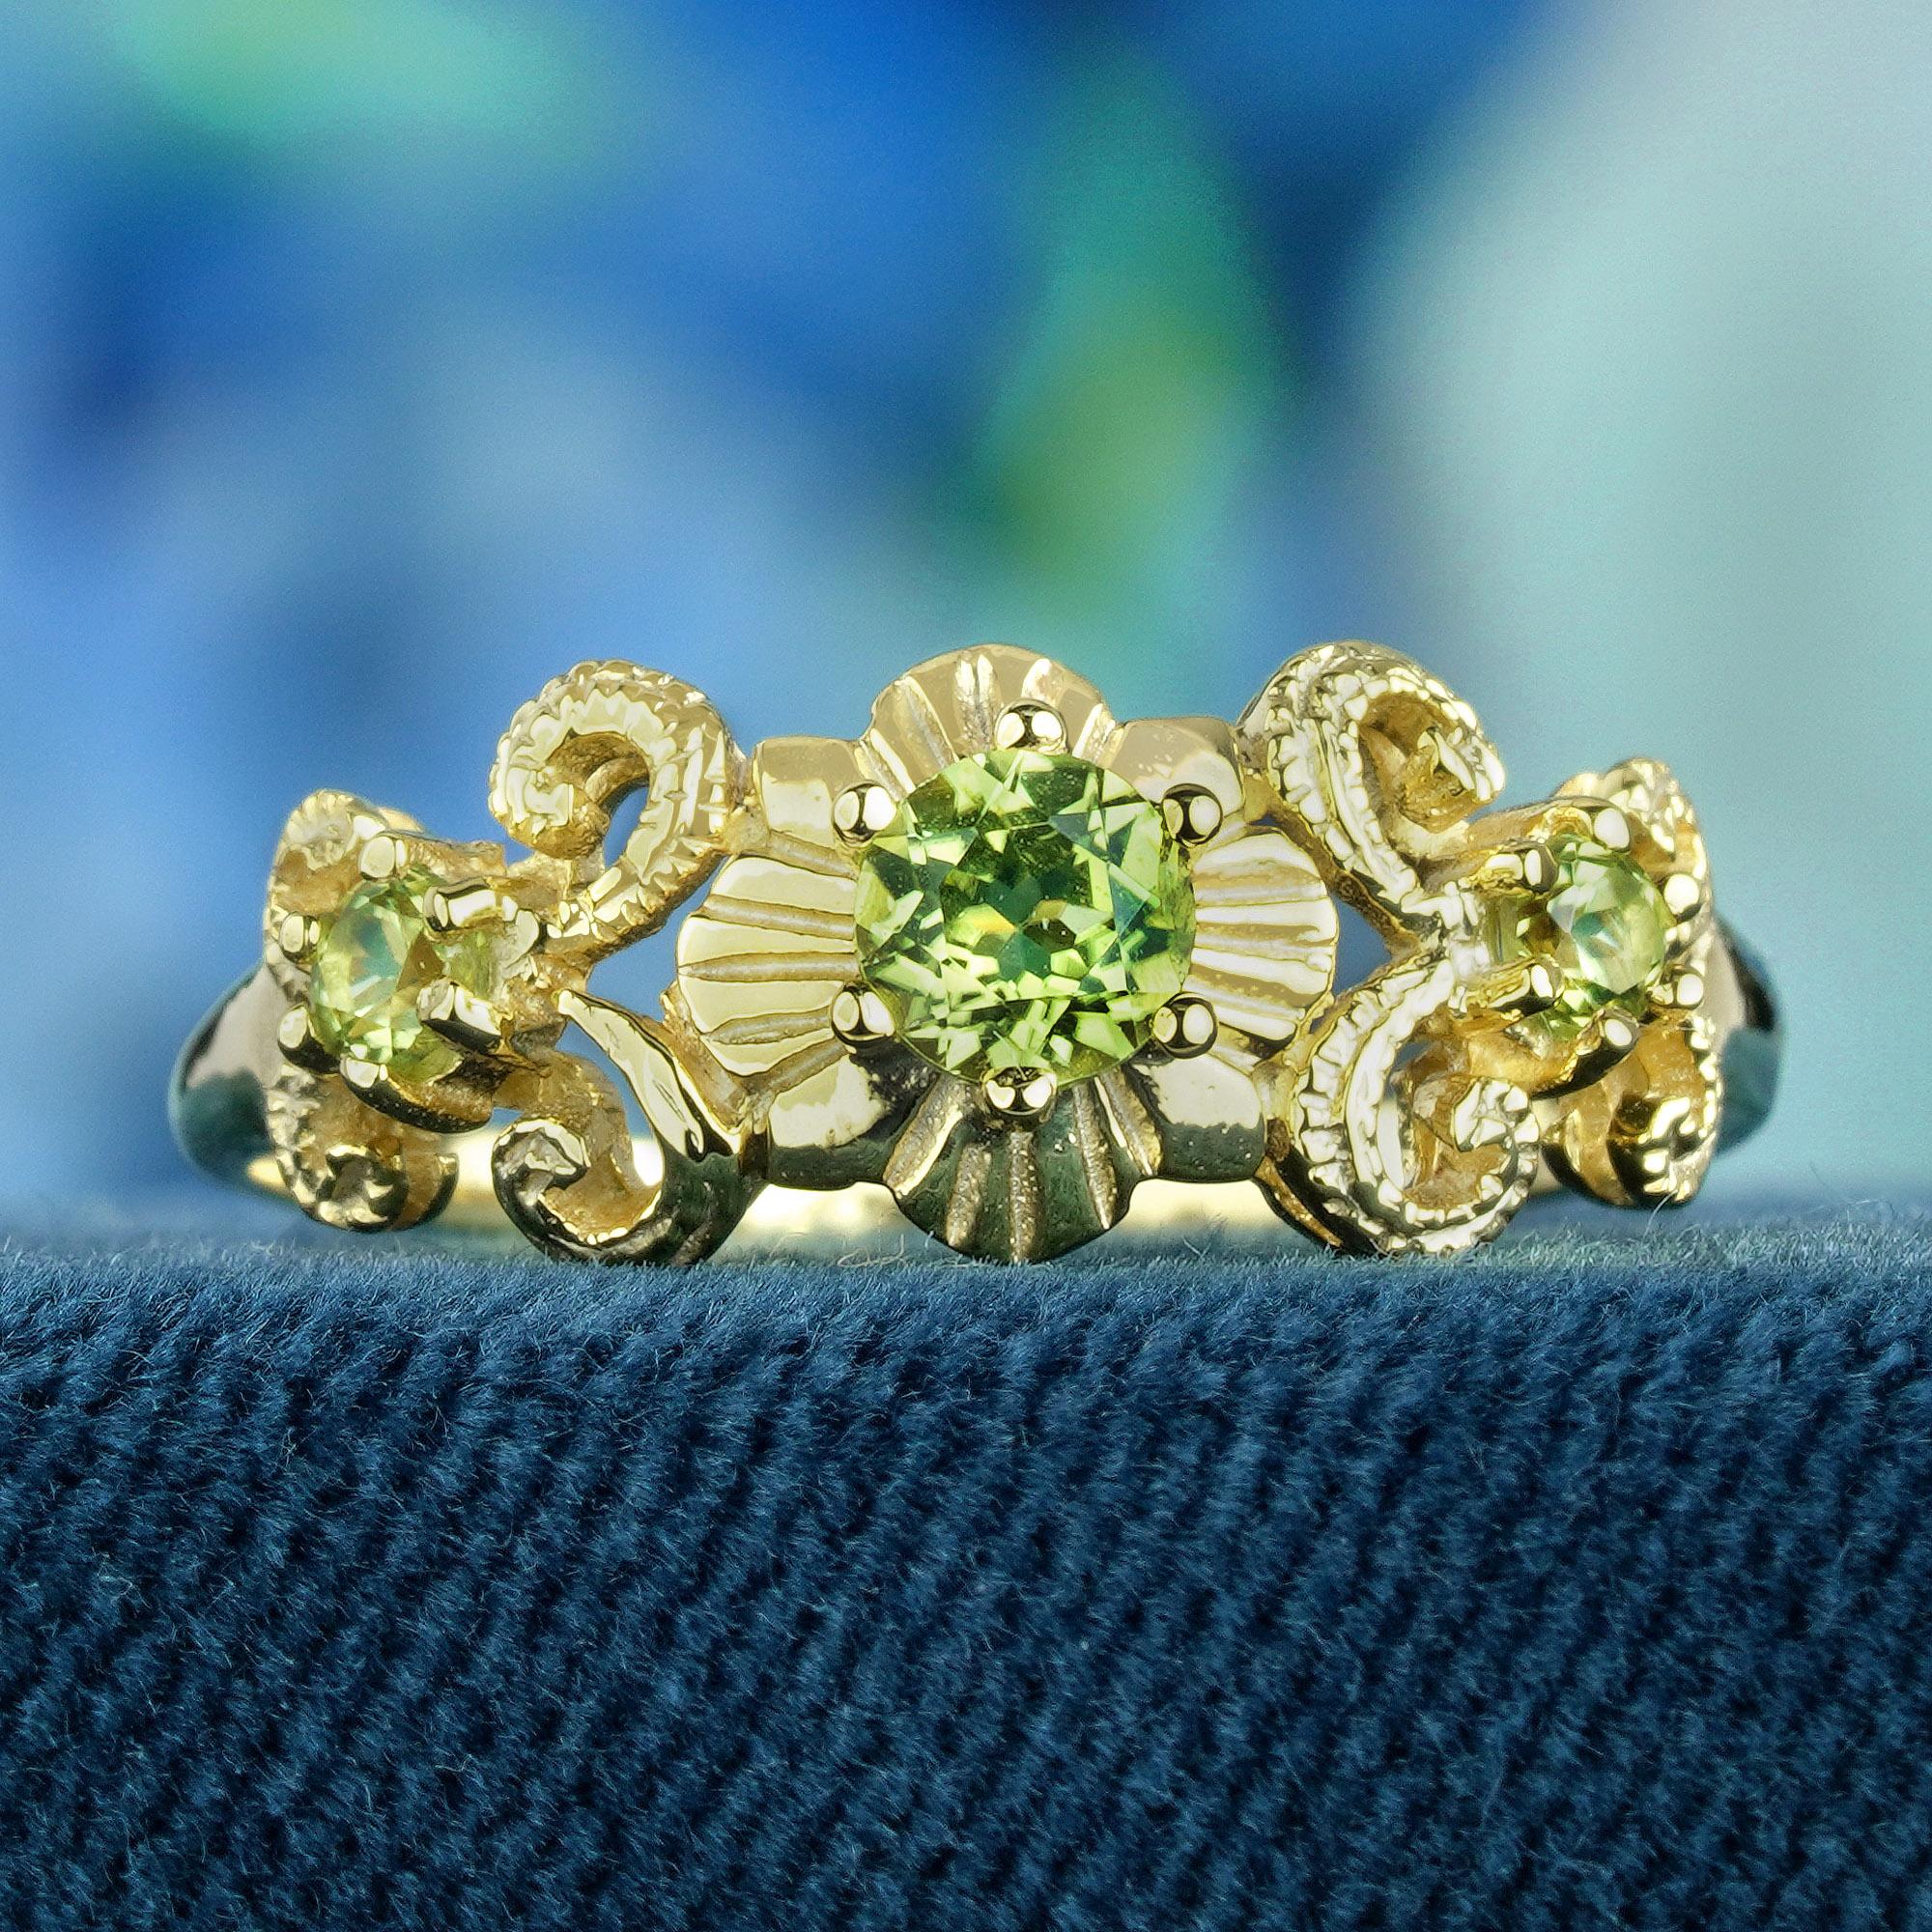 This vintage-inspired ring radiates elegance, boasting intricate carved and curled detailing that accentuates its beauty. Featuring three round lime green peridots set delicately in prongs on a yellow gold band, its design exudes timeless charm.